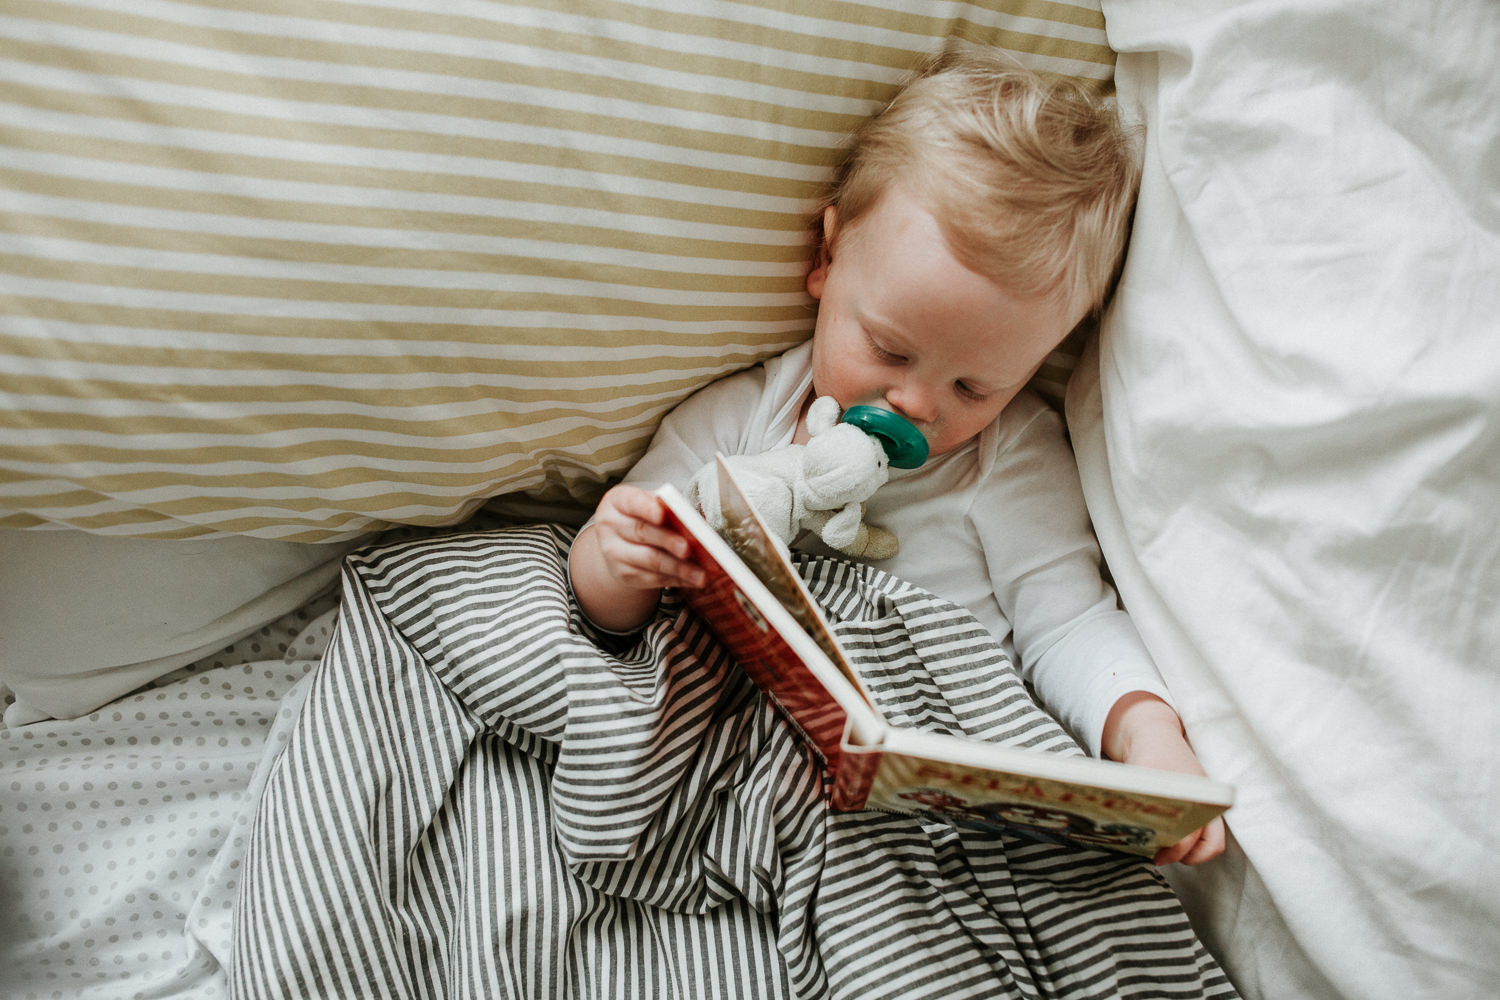 18 month old blonde boy lying in bed with striped linens, reading book - Stouffville Family Photography